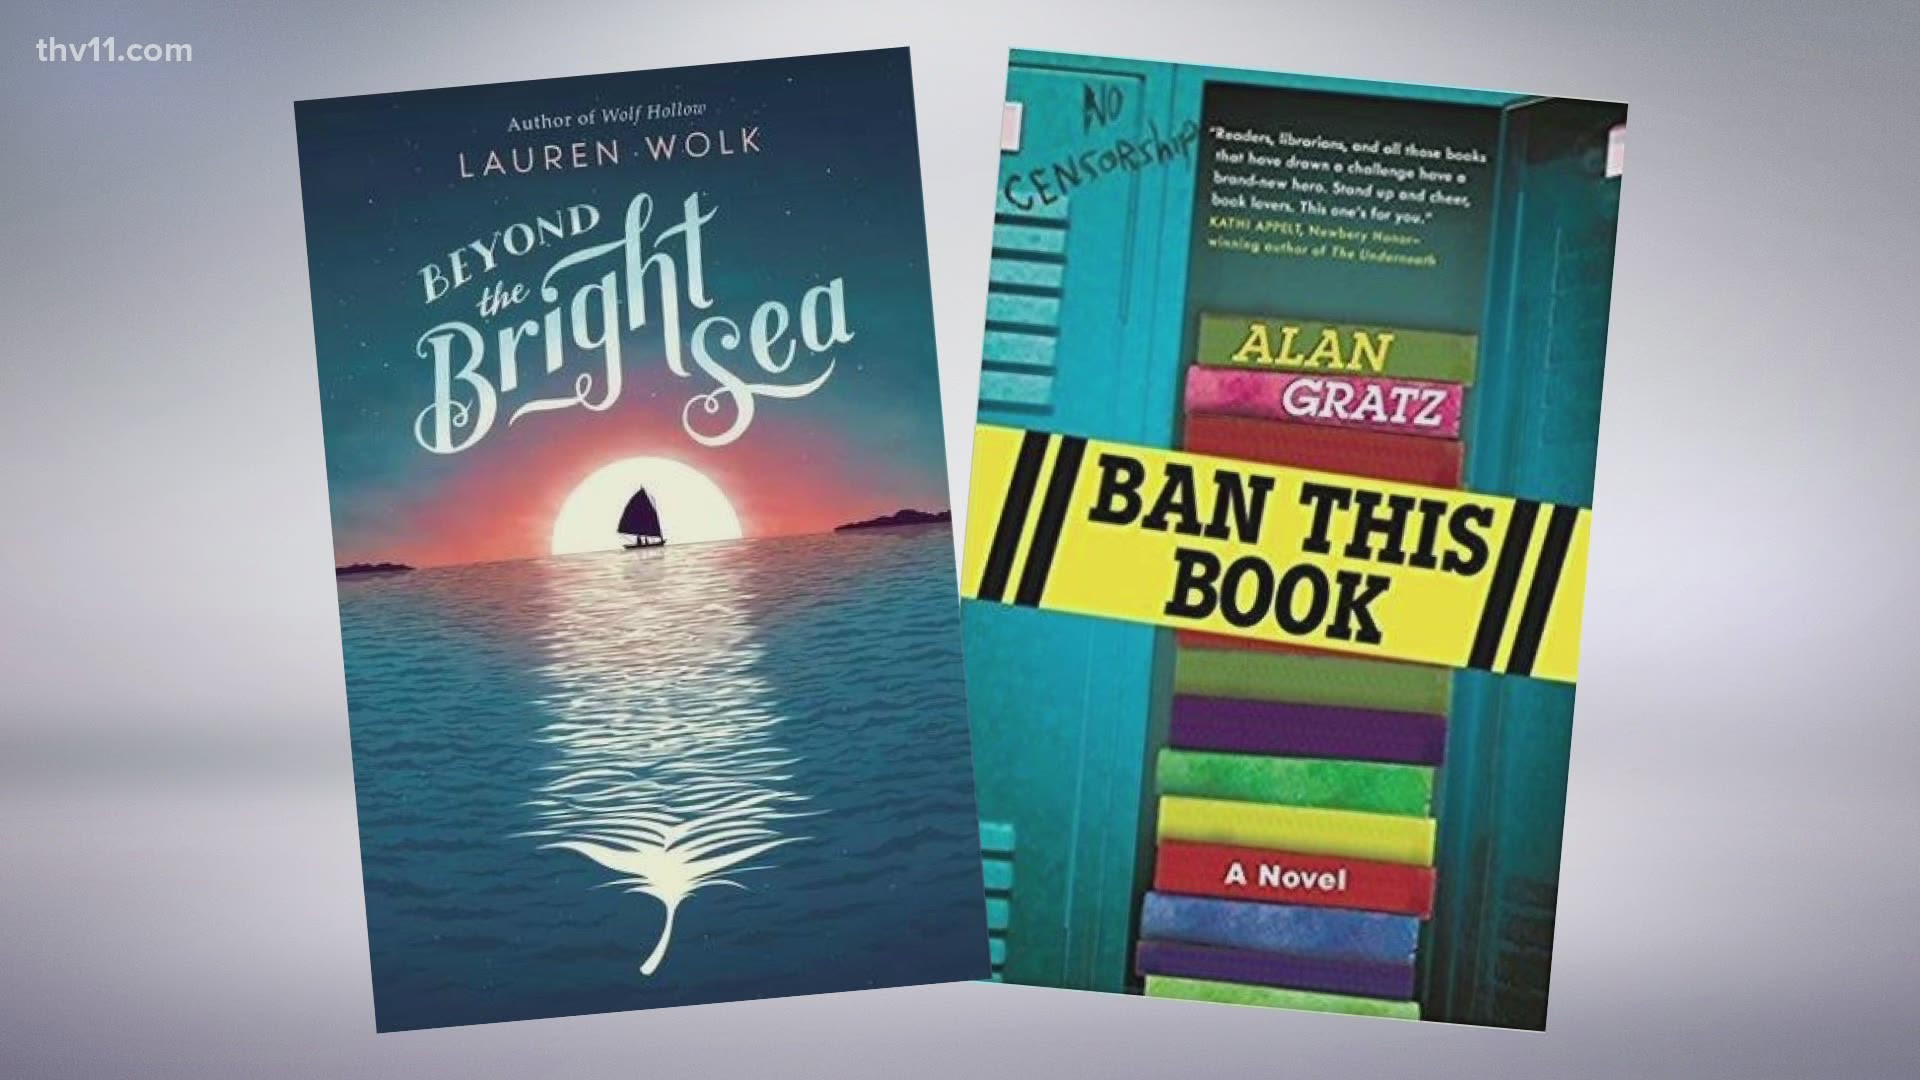 Three plot lines from 15 books nominated for the Charlie May Simon Award.